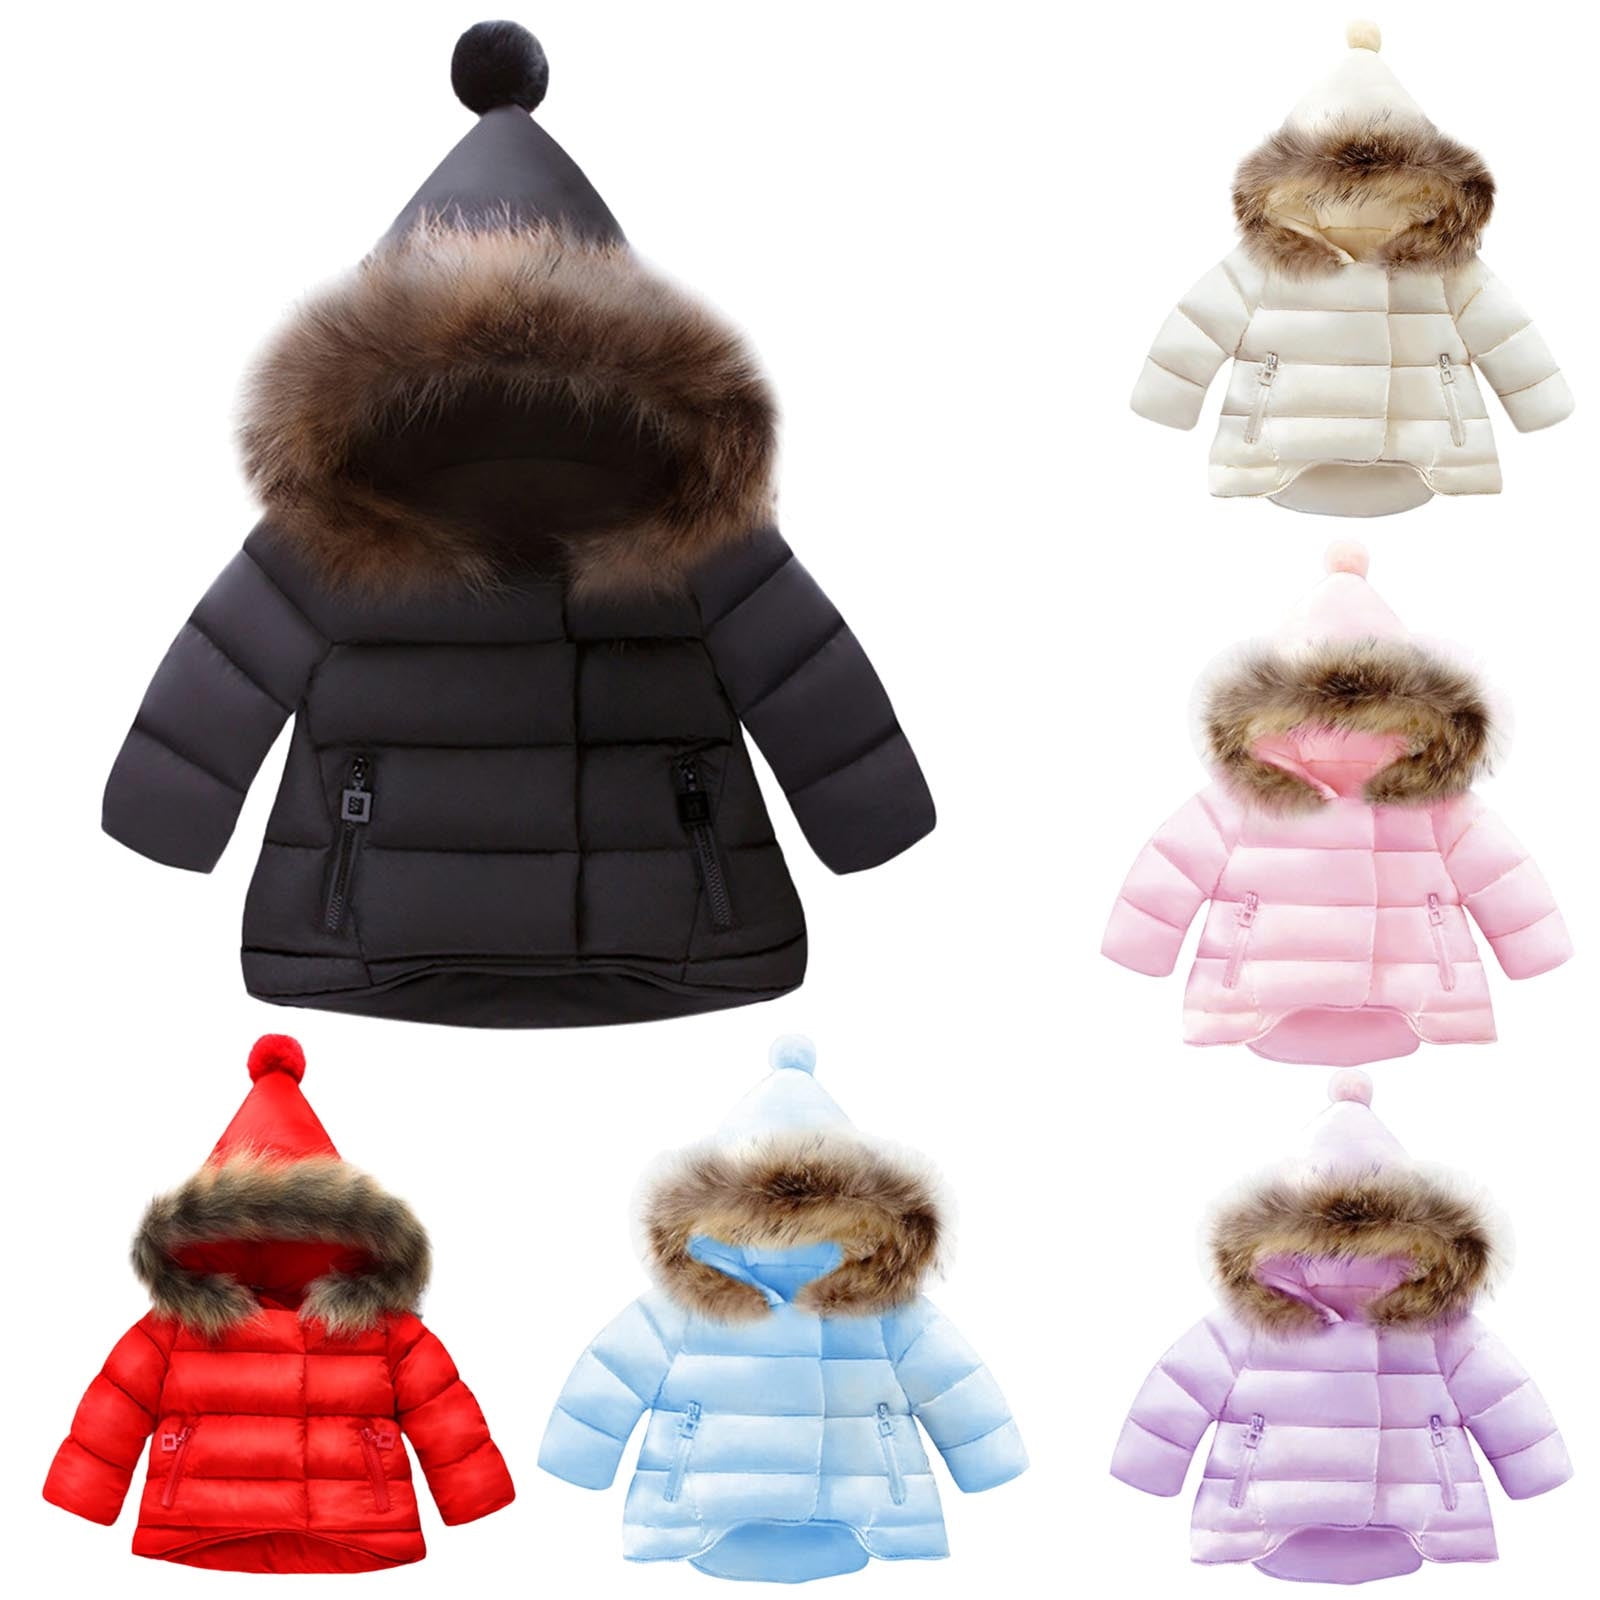 My Sky Baby Girls Infant Winter Cotton Outerwear Coats Snowsuit Jackets Yellow 80 